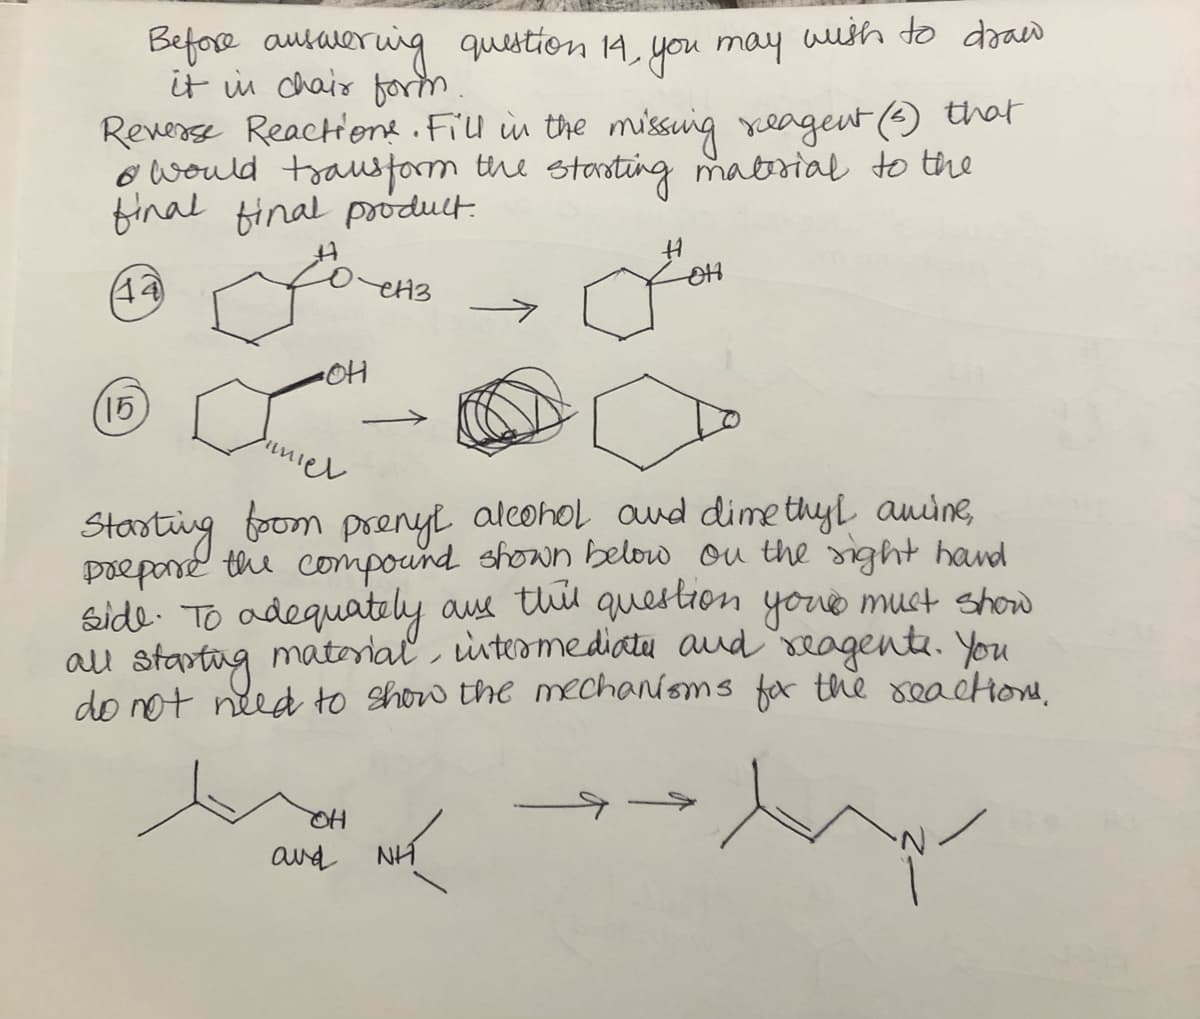 Before answering question 14, you may wish to draw
it in chair form.
Reverse Reactions. Fill in the missing reagent (3) that
& would transform the starting material to the
final final product.
(44)
енз
(15)
umiel
Starting from prenyl alcohol and dimethyl amine,
prepare the compound shown below on the right hand
side. To adequately are this question your must show
all starting material, intermediate and reagents. You
do not need to show the mechanisms for the reactions.
-OH
OH
and
он
NH